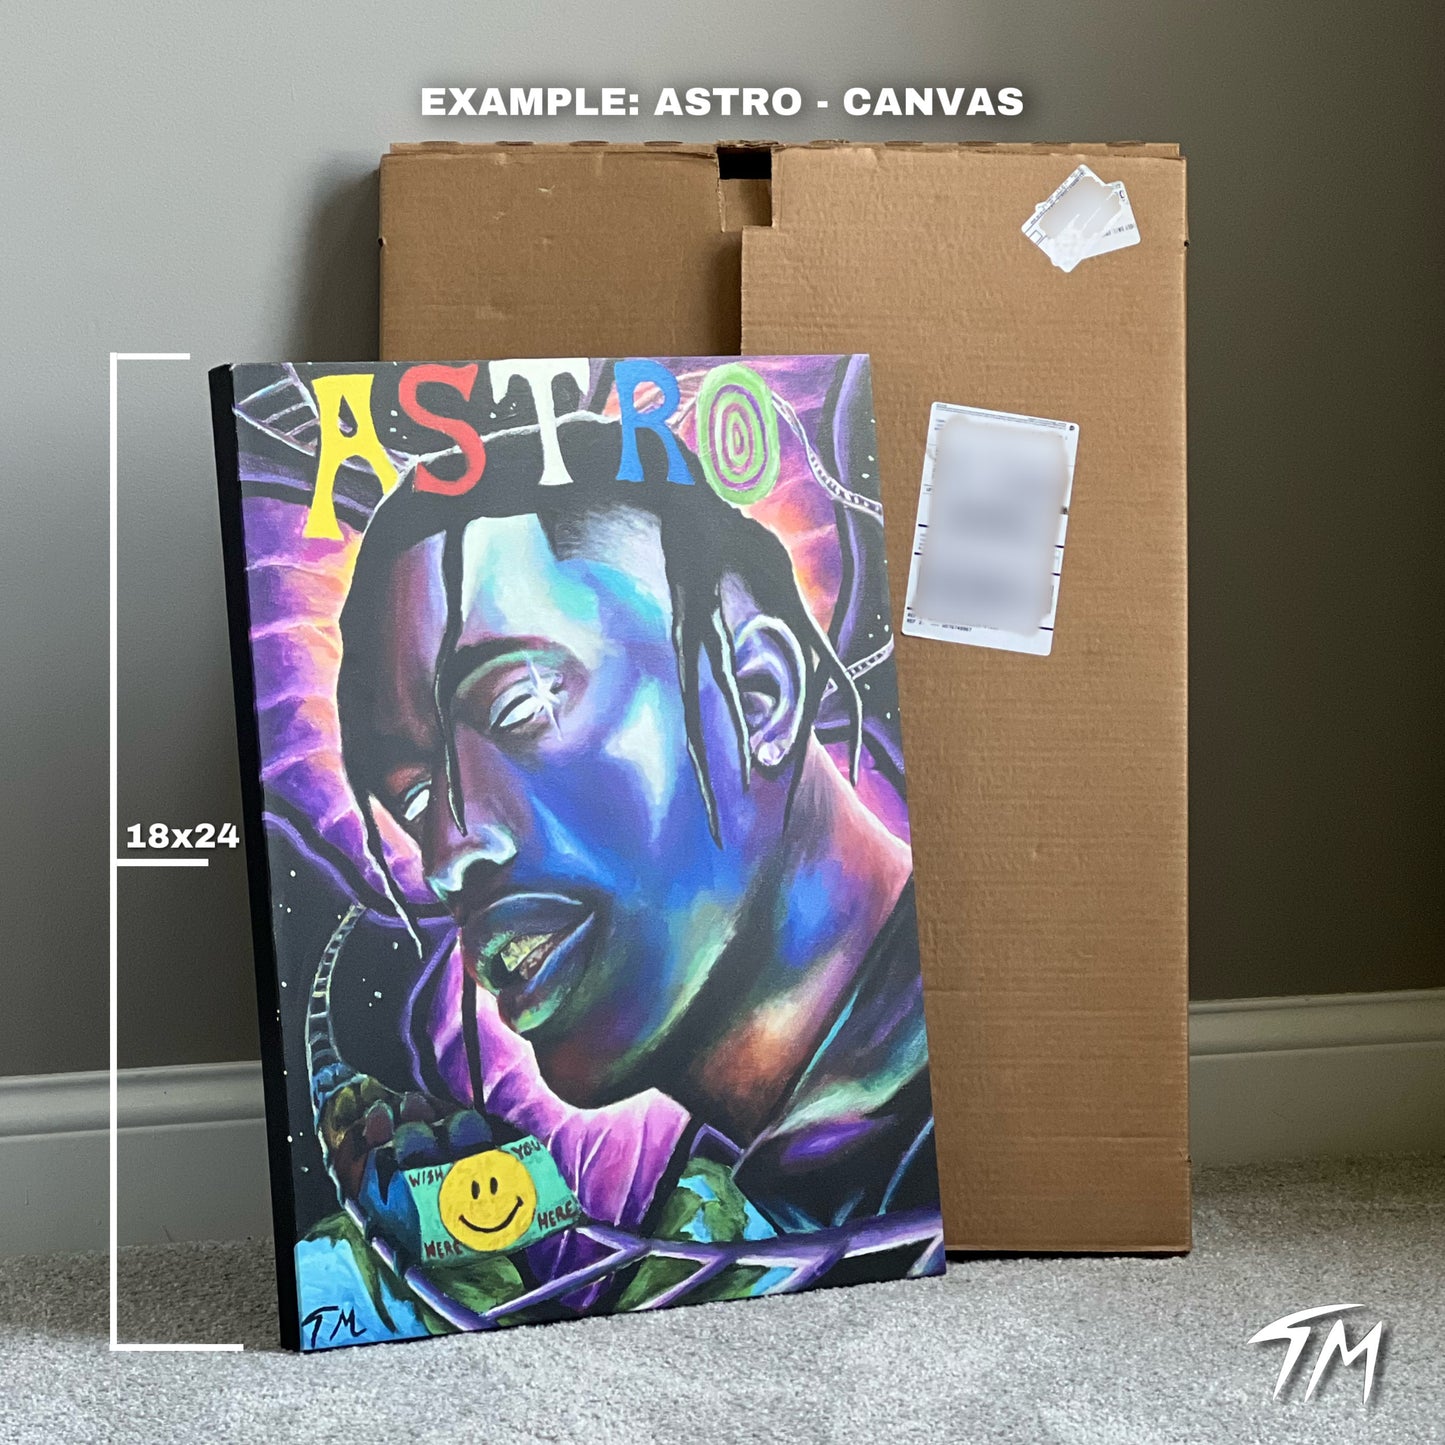 Nba All-Time Legends - Canvas